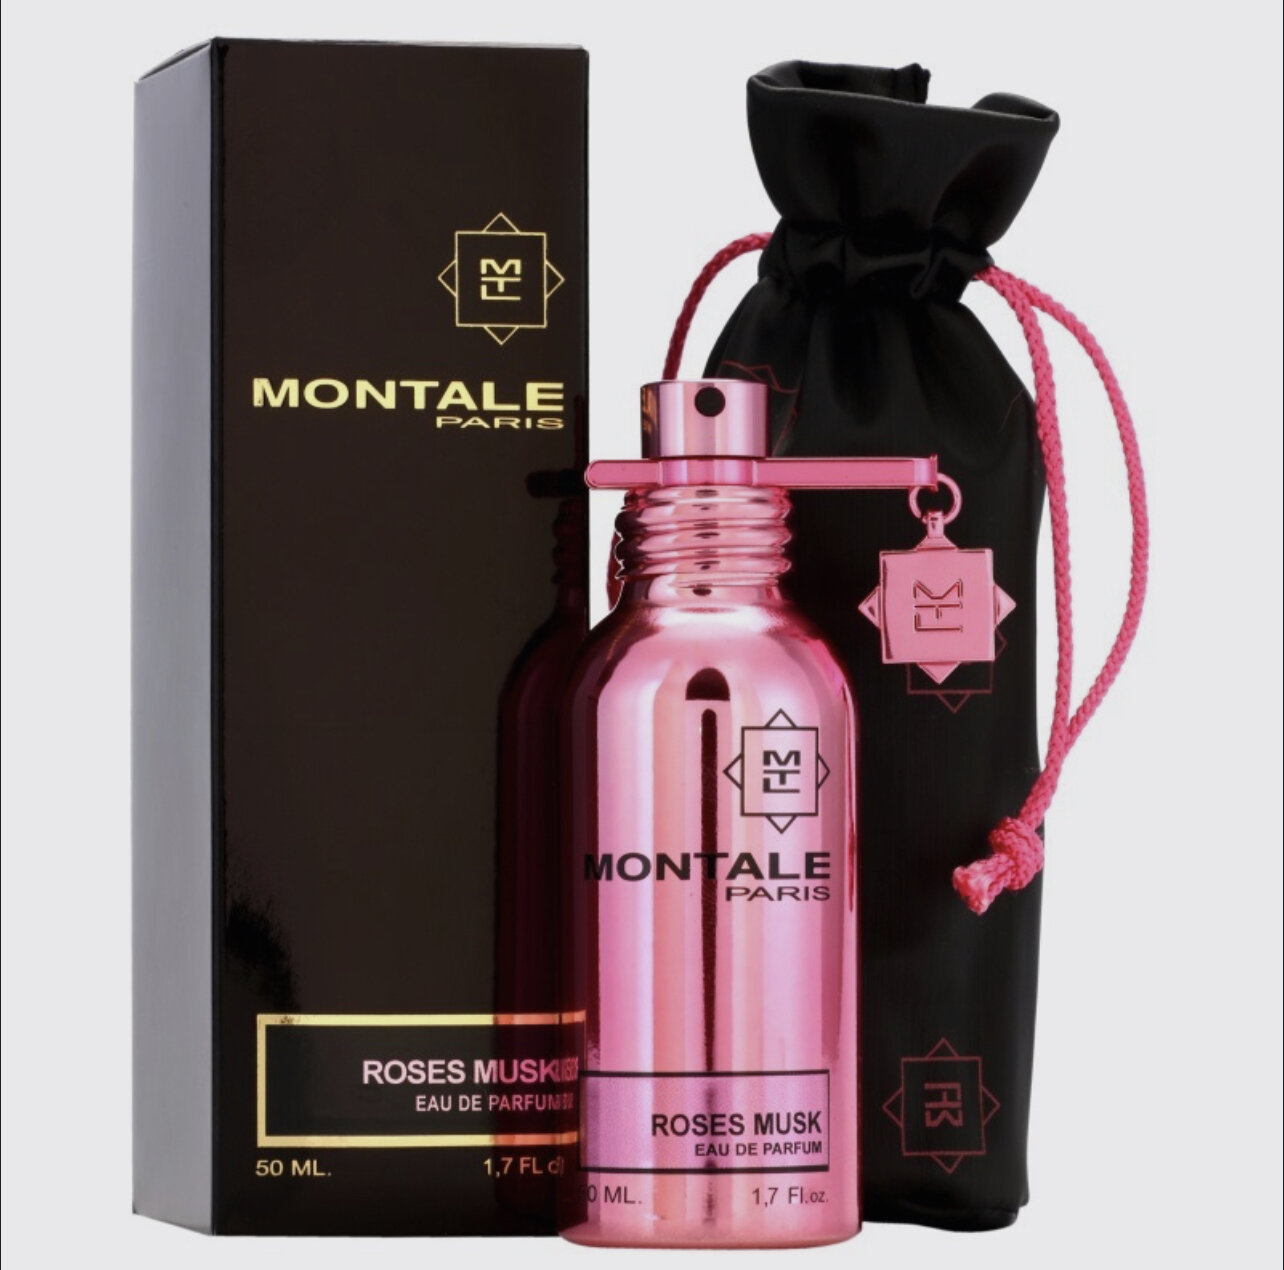 Montale Roses Musk edp, Парфюмерная вода Жен. 50мл.